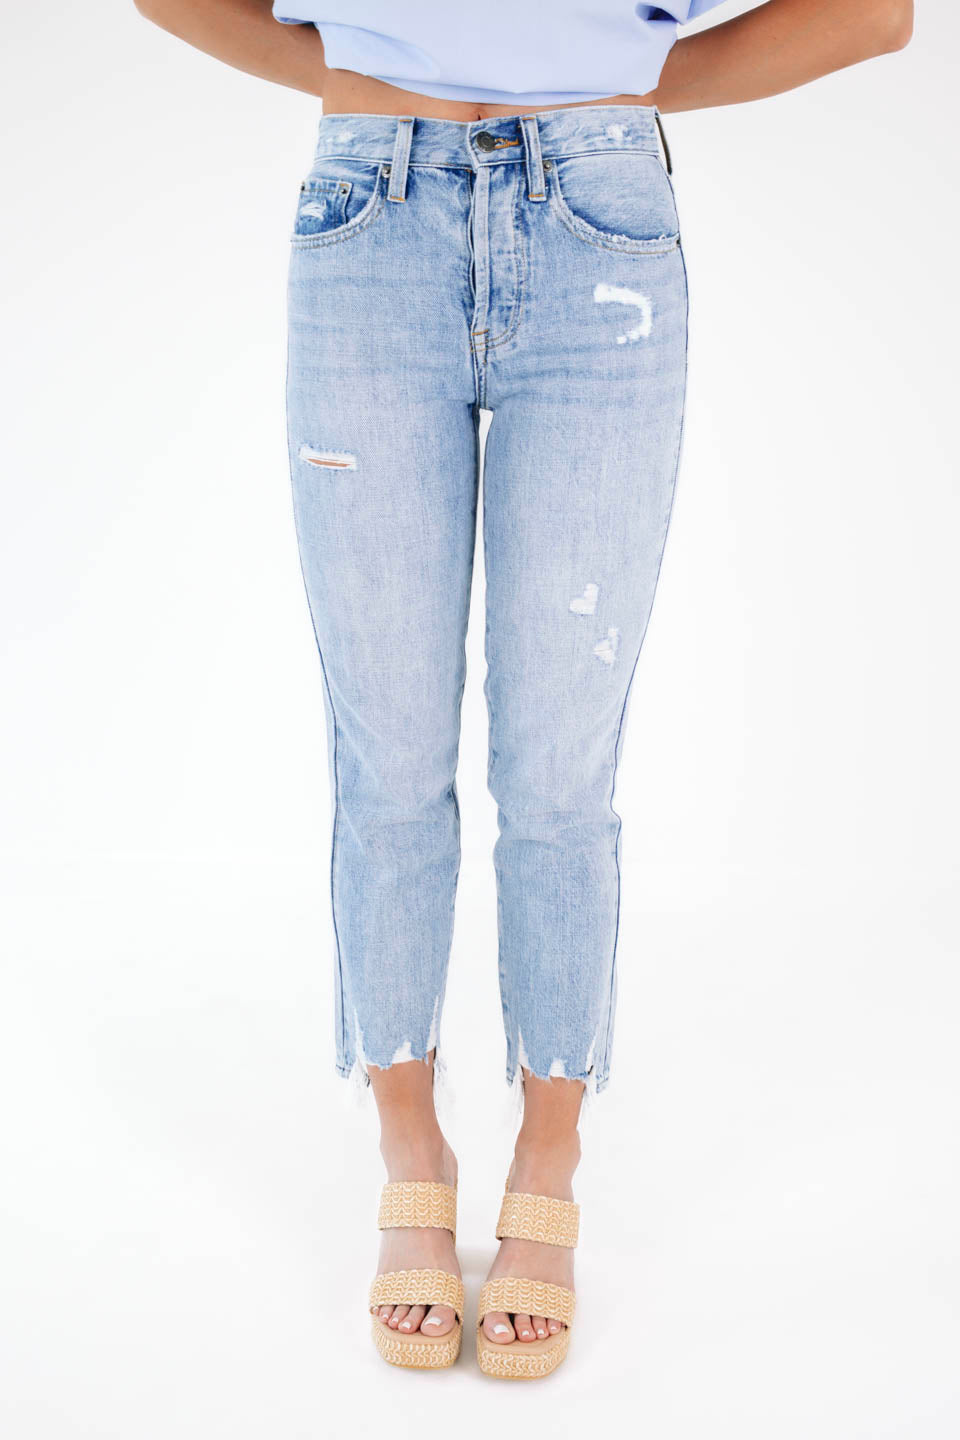 Pistola Charlie High Rise Jeans - Ruthless – The Impeccable Pig